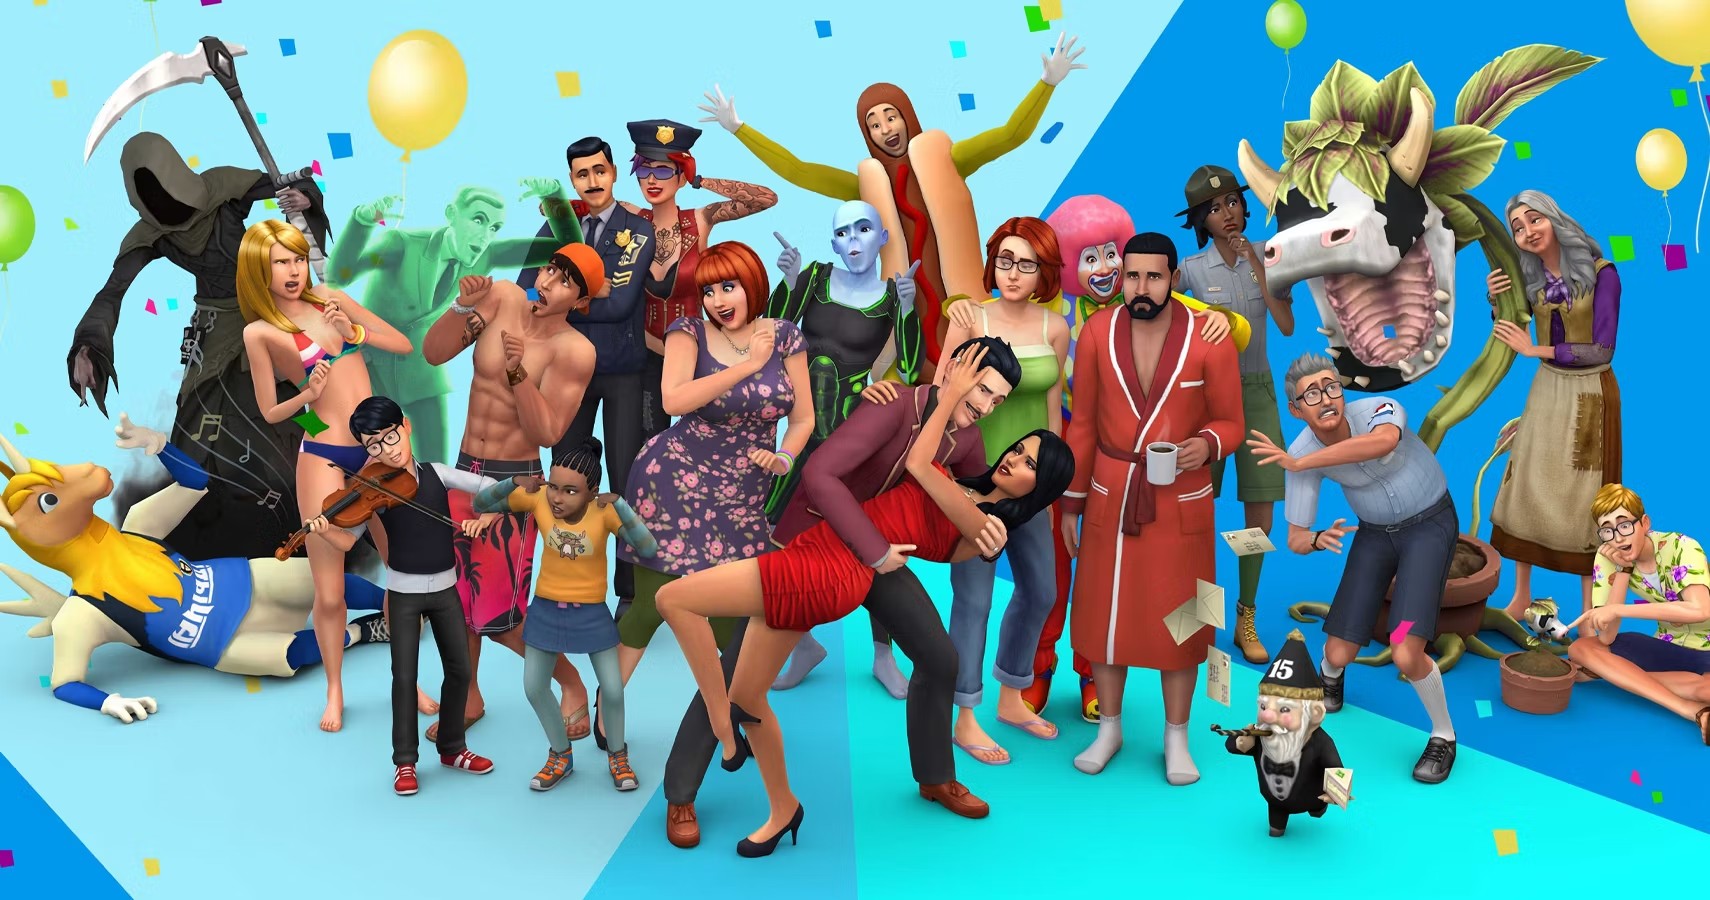 The Sims 4 base game will be free to download starting next month